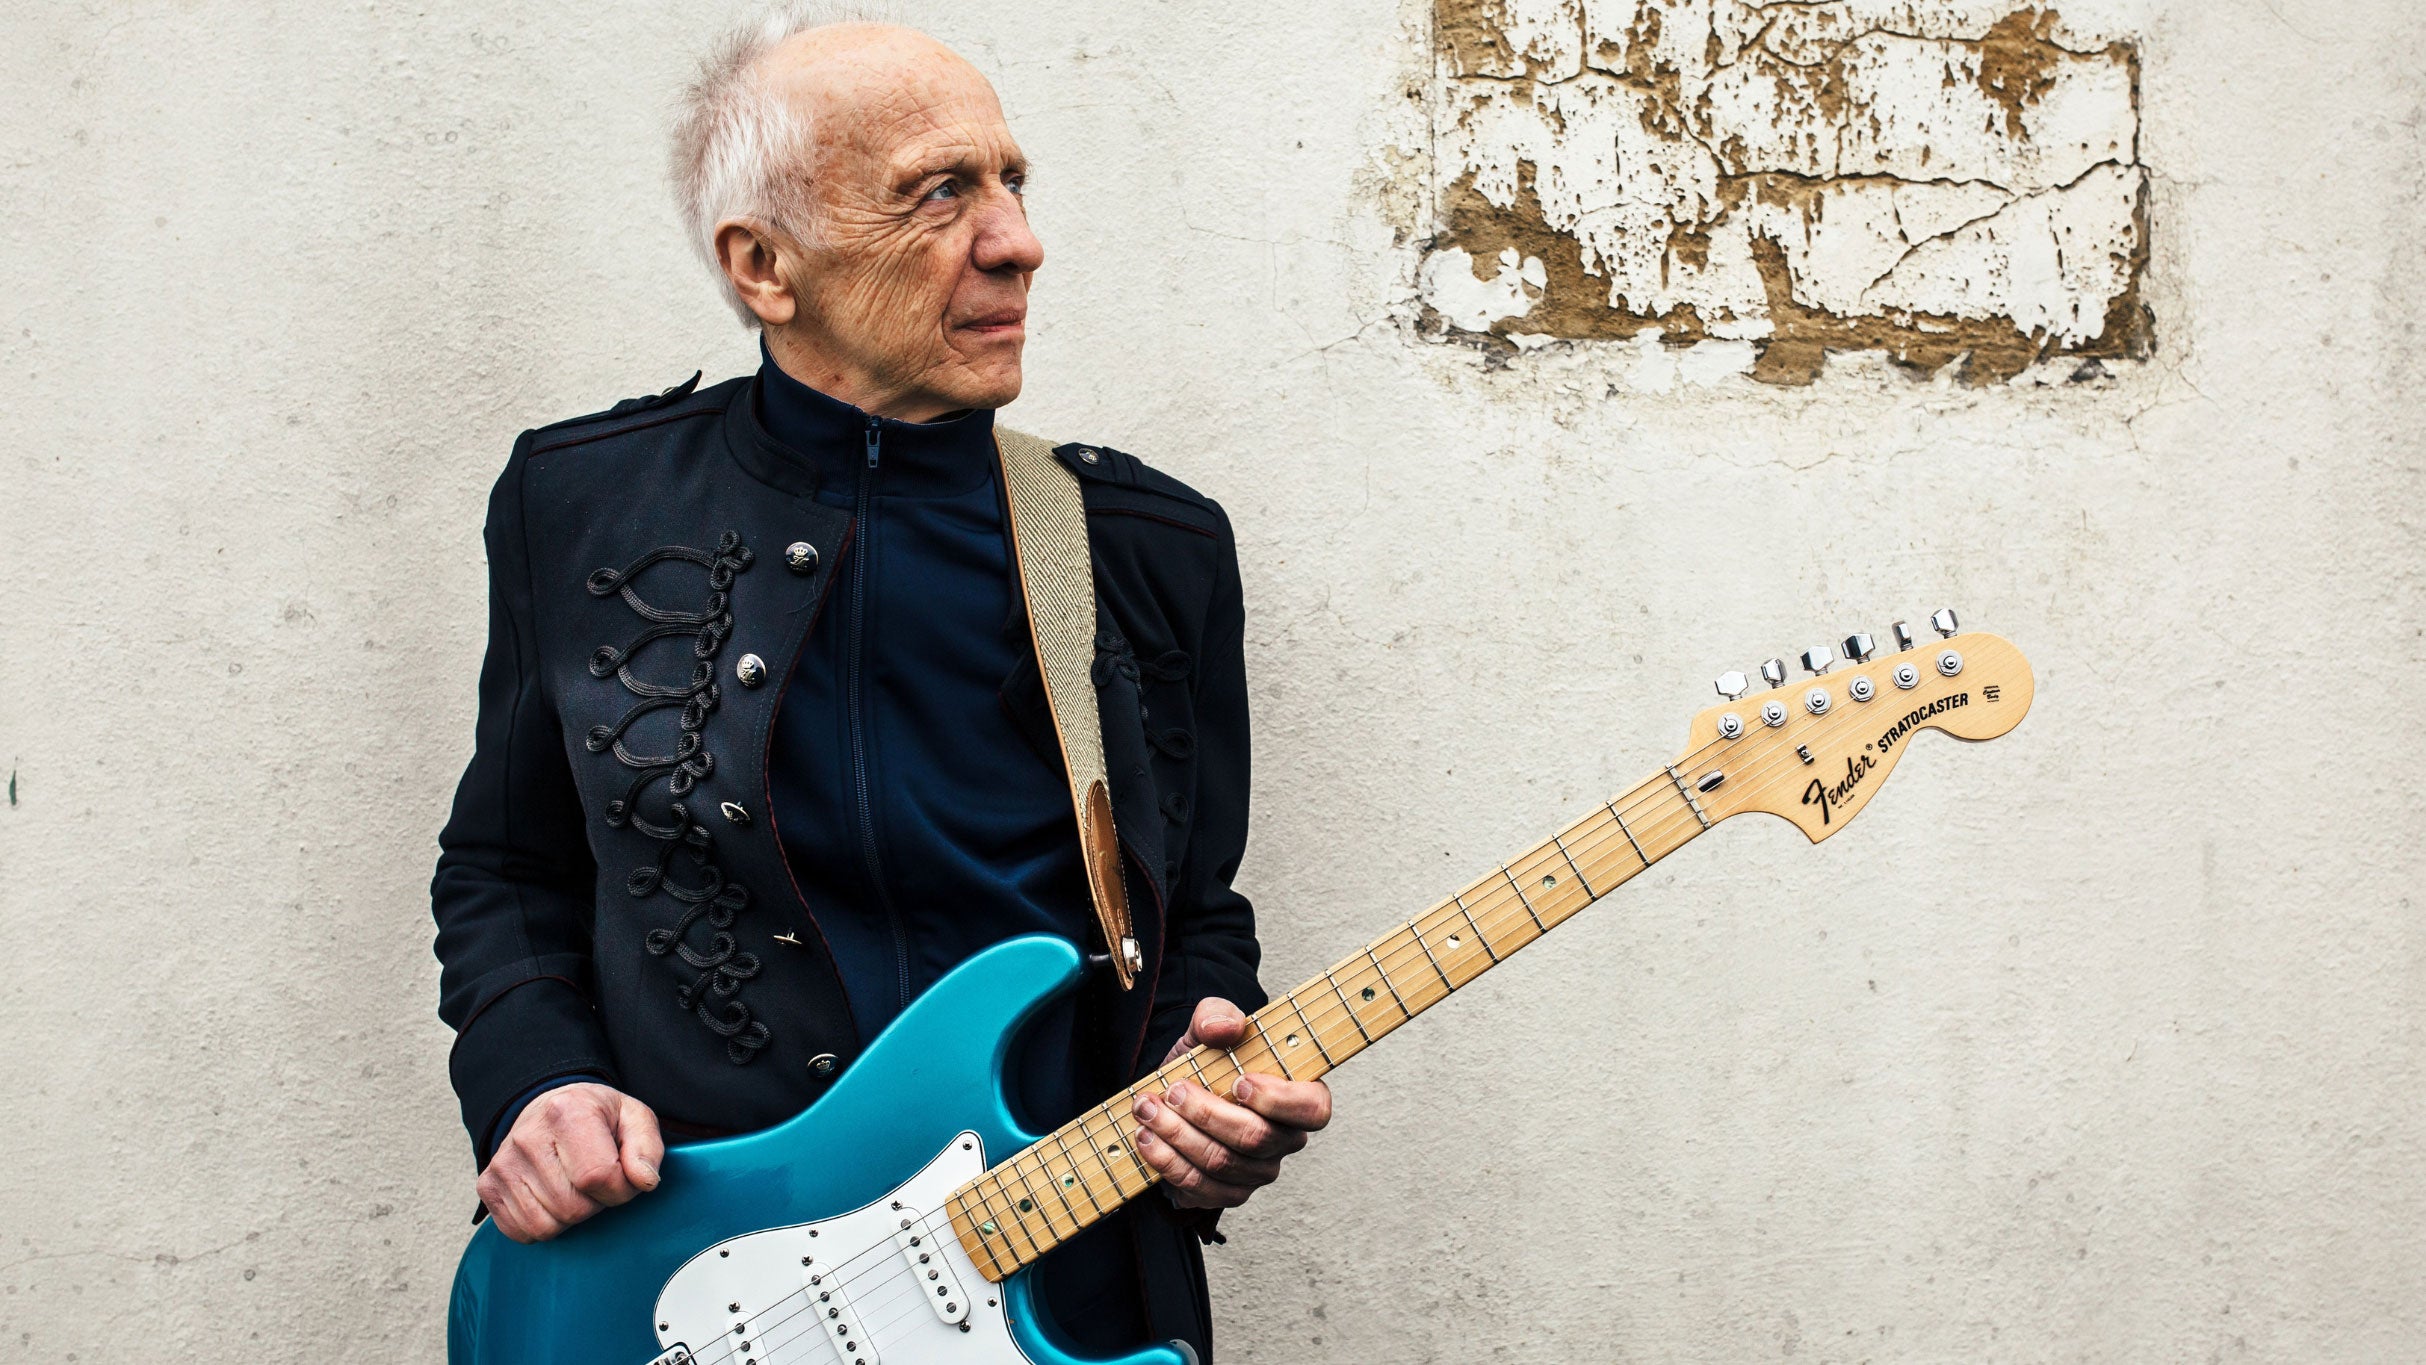 Robin Trower presale code for event tickets in Des Moines, IA (Hoyt Sherman Place)